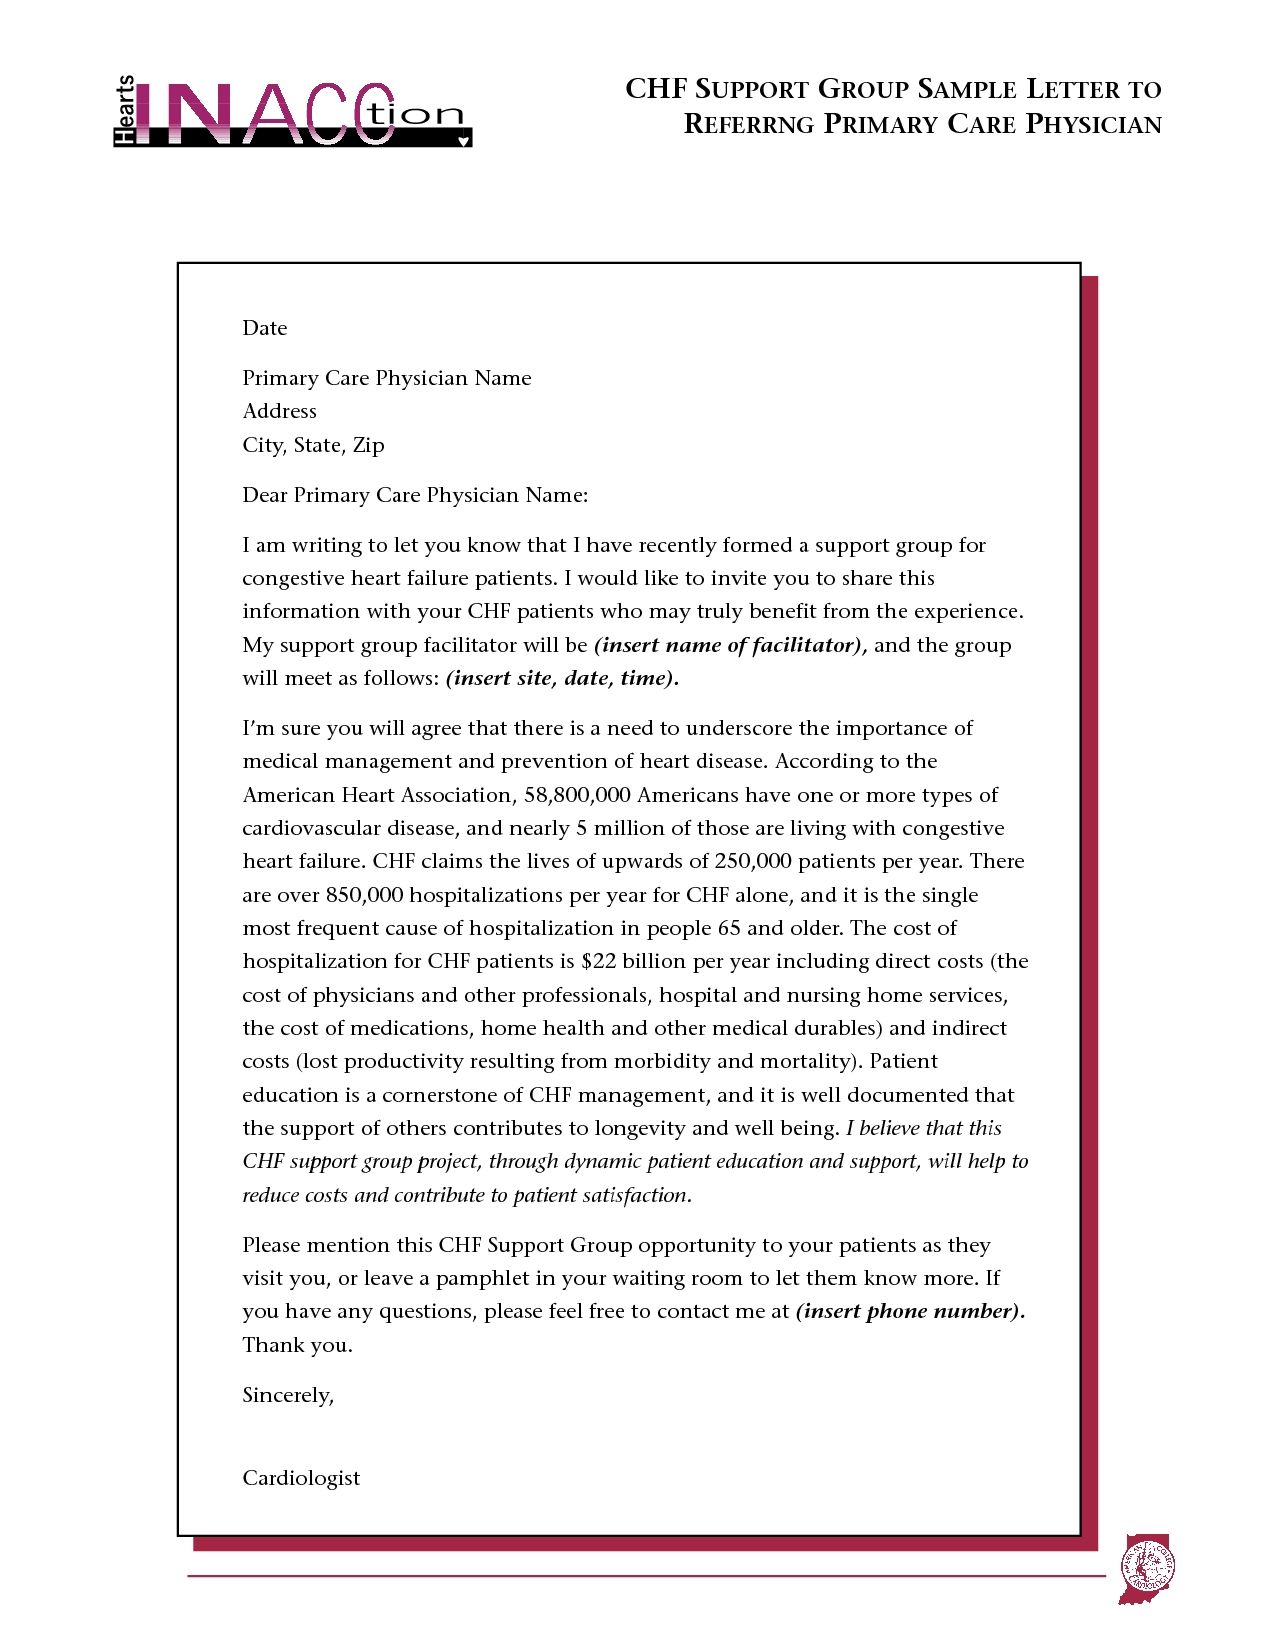 Recommendation Letter For Doctor Ivedipreceptivco inside dimensions 1275 X 1650